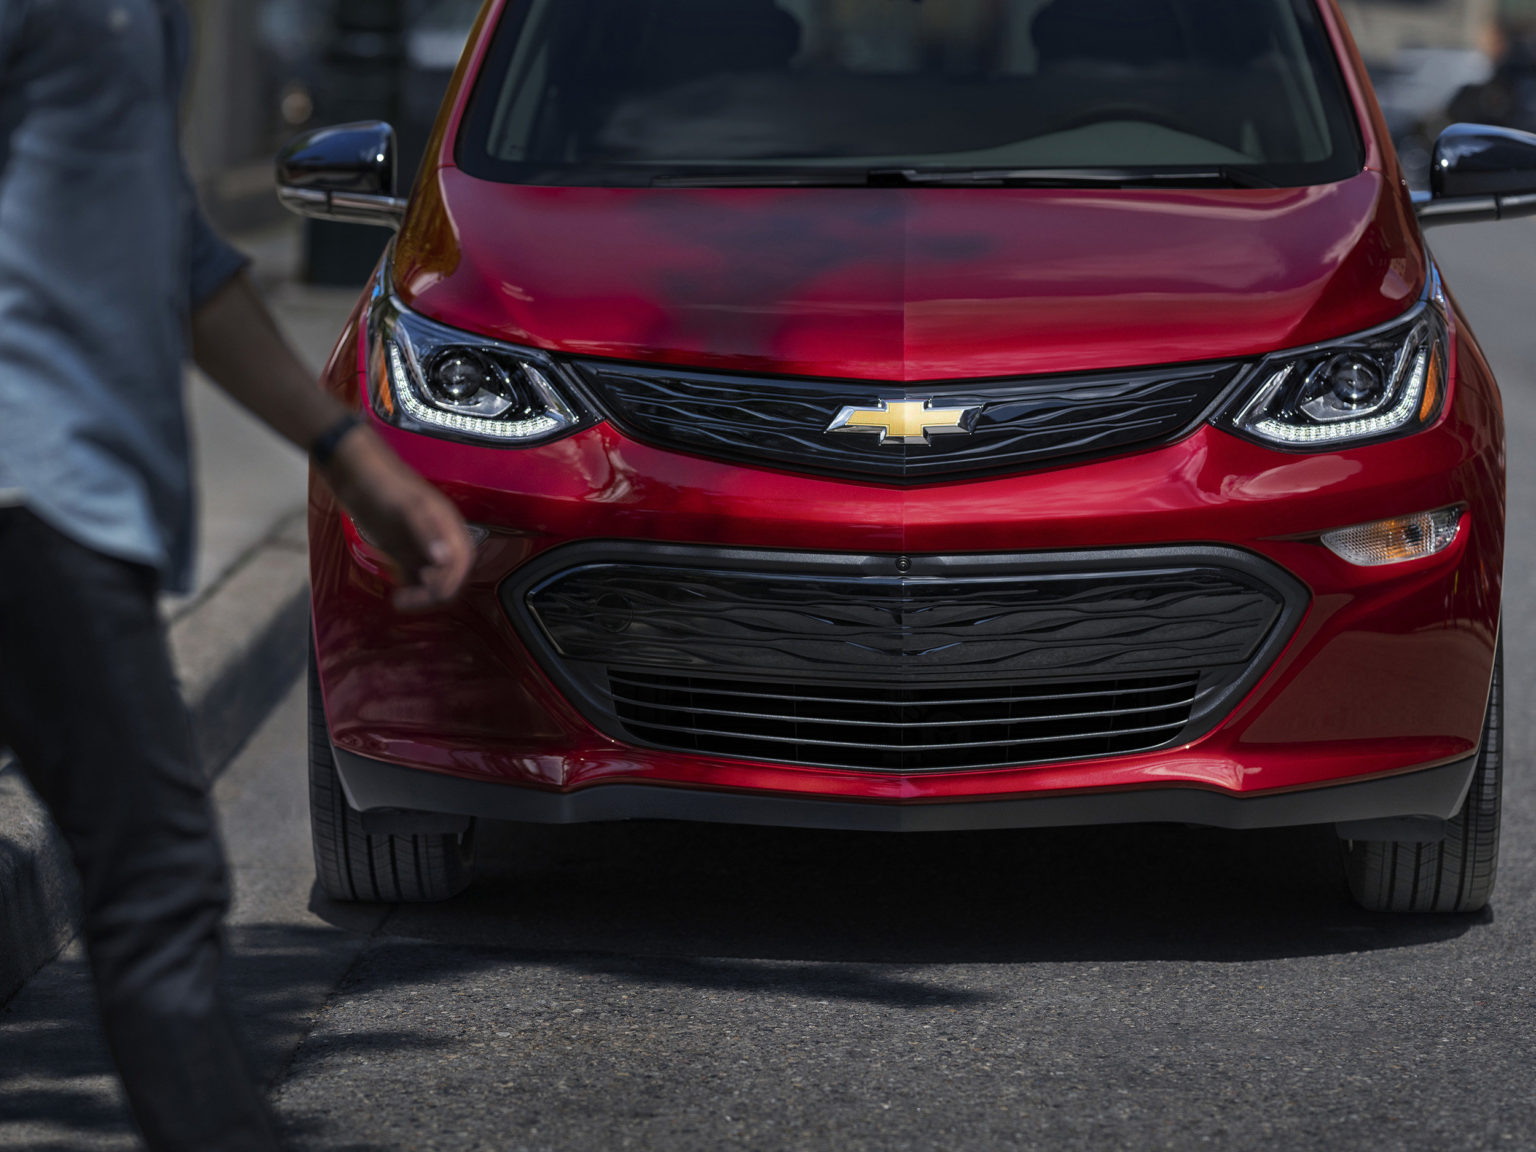 The 2020 Chevrolet Bolt EV offers over 250 miles of all-electric range.